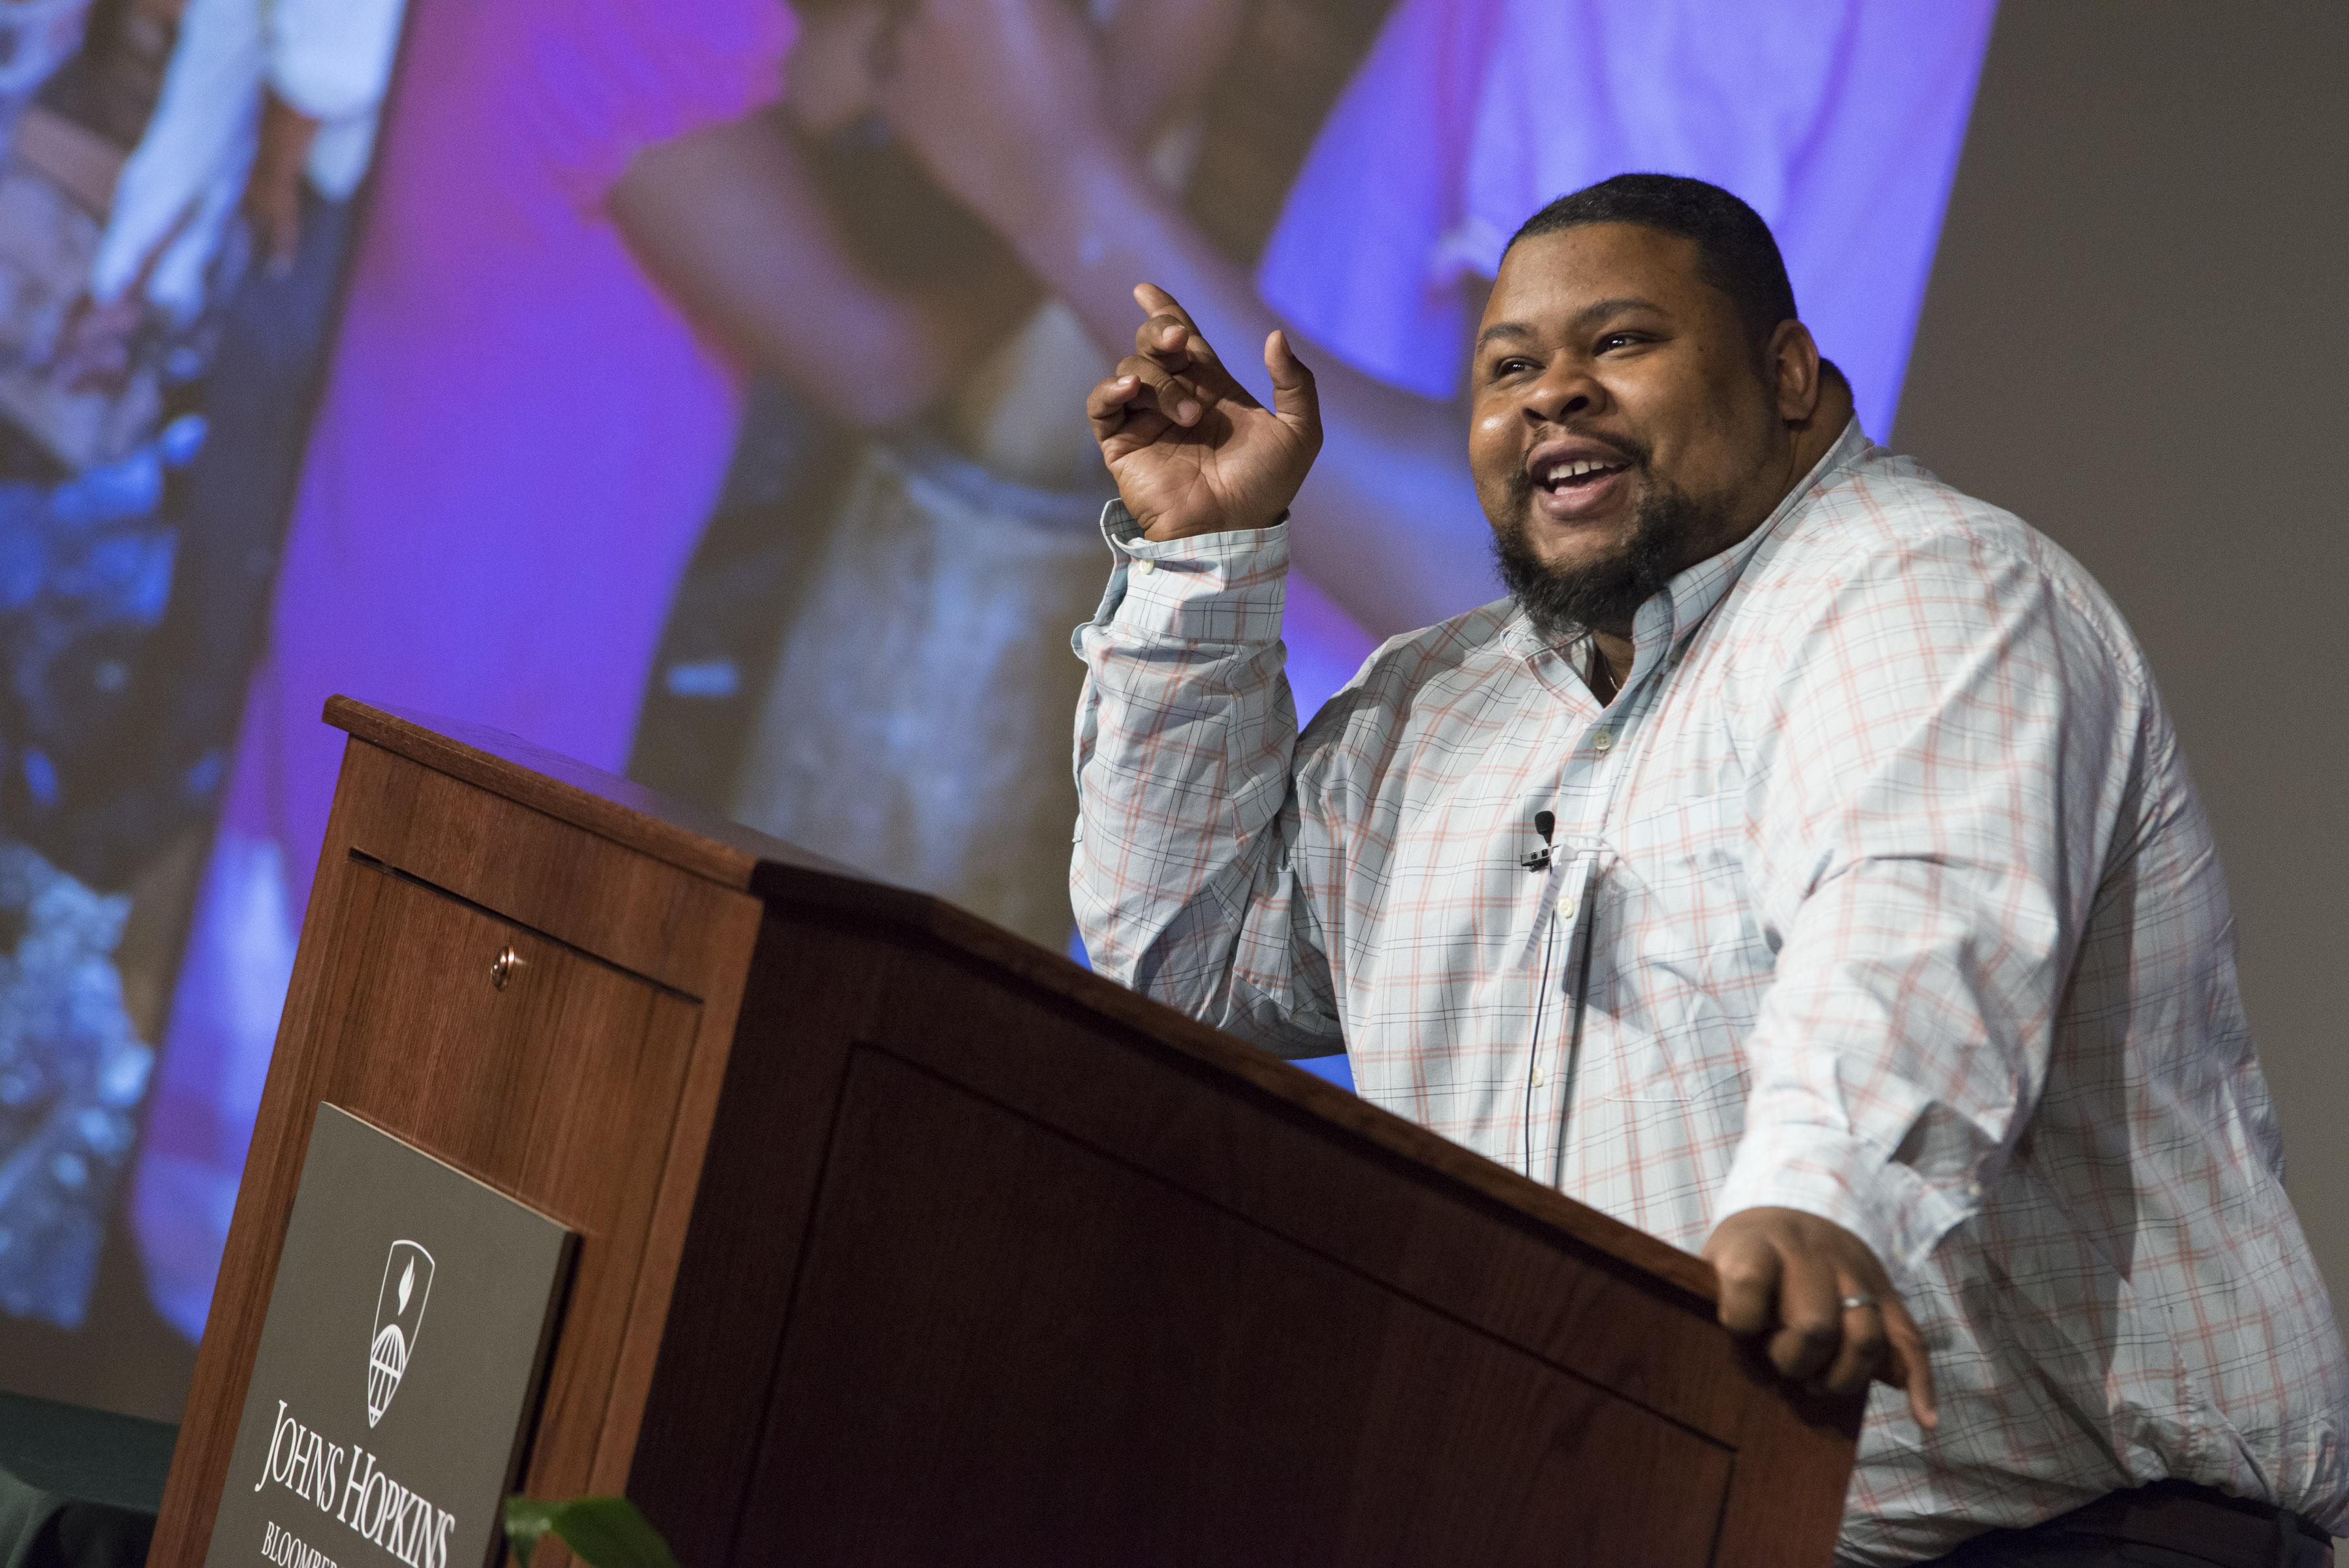 The Philly Chef Conference presents an evening with Michael Twitty